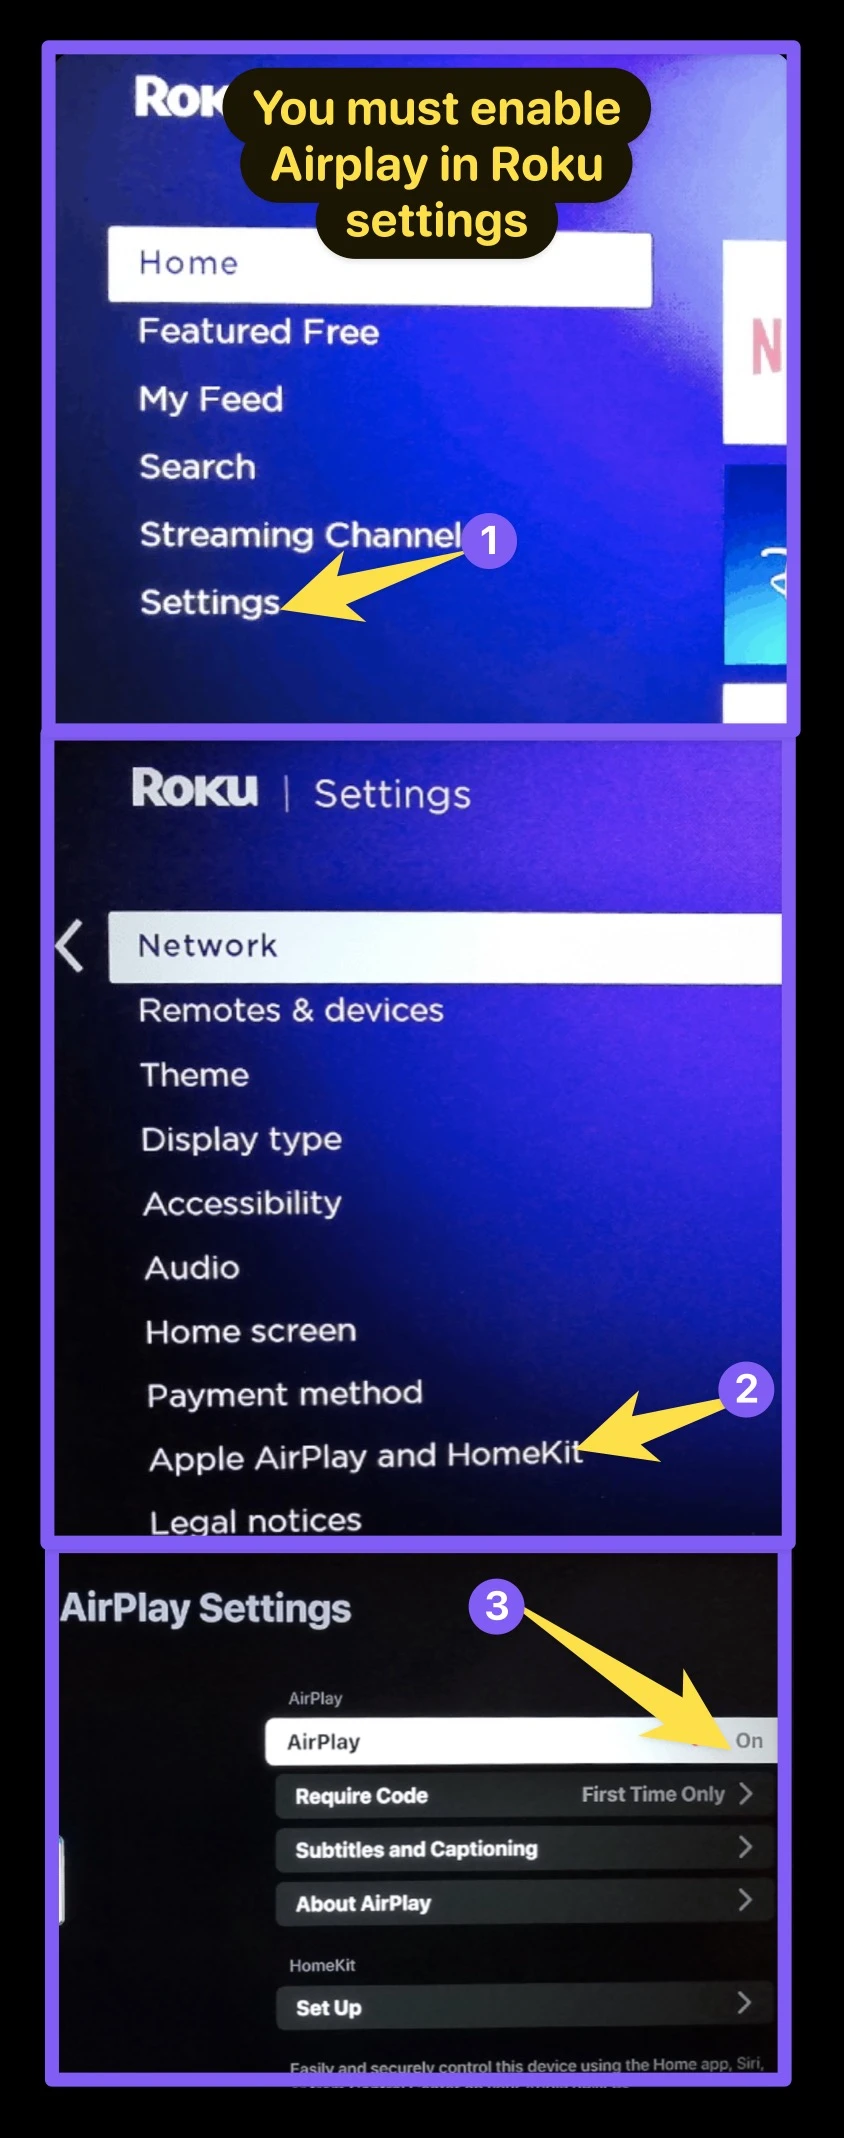 You must enable Airplay in Roku settings before mirroring to Roku from iphone or ipad